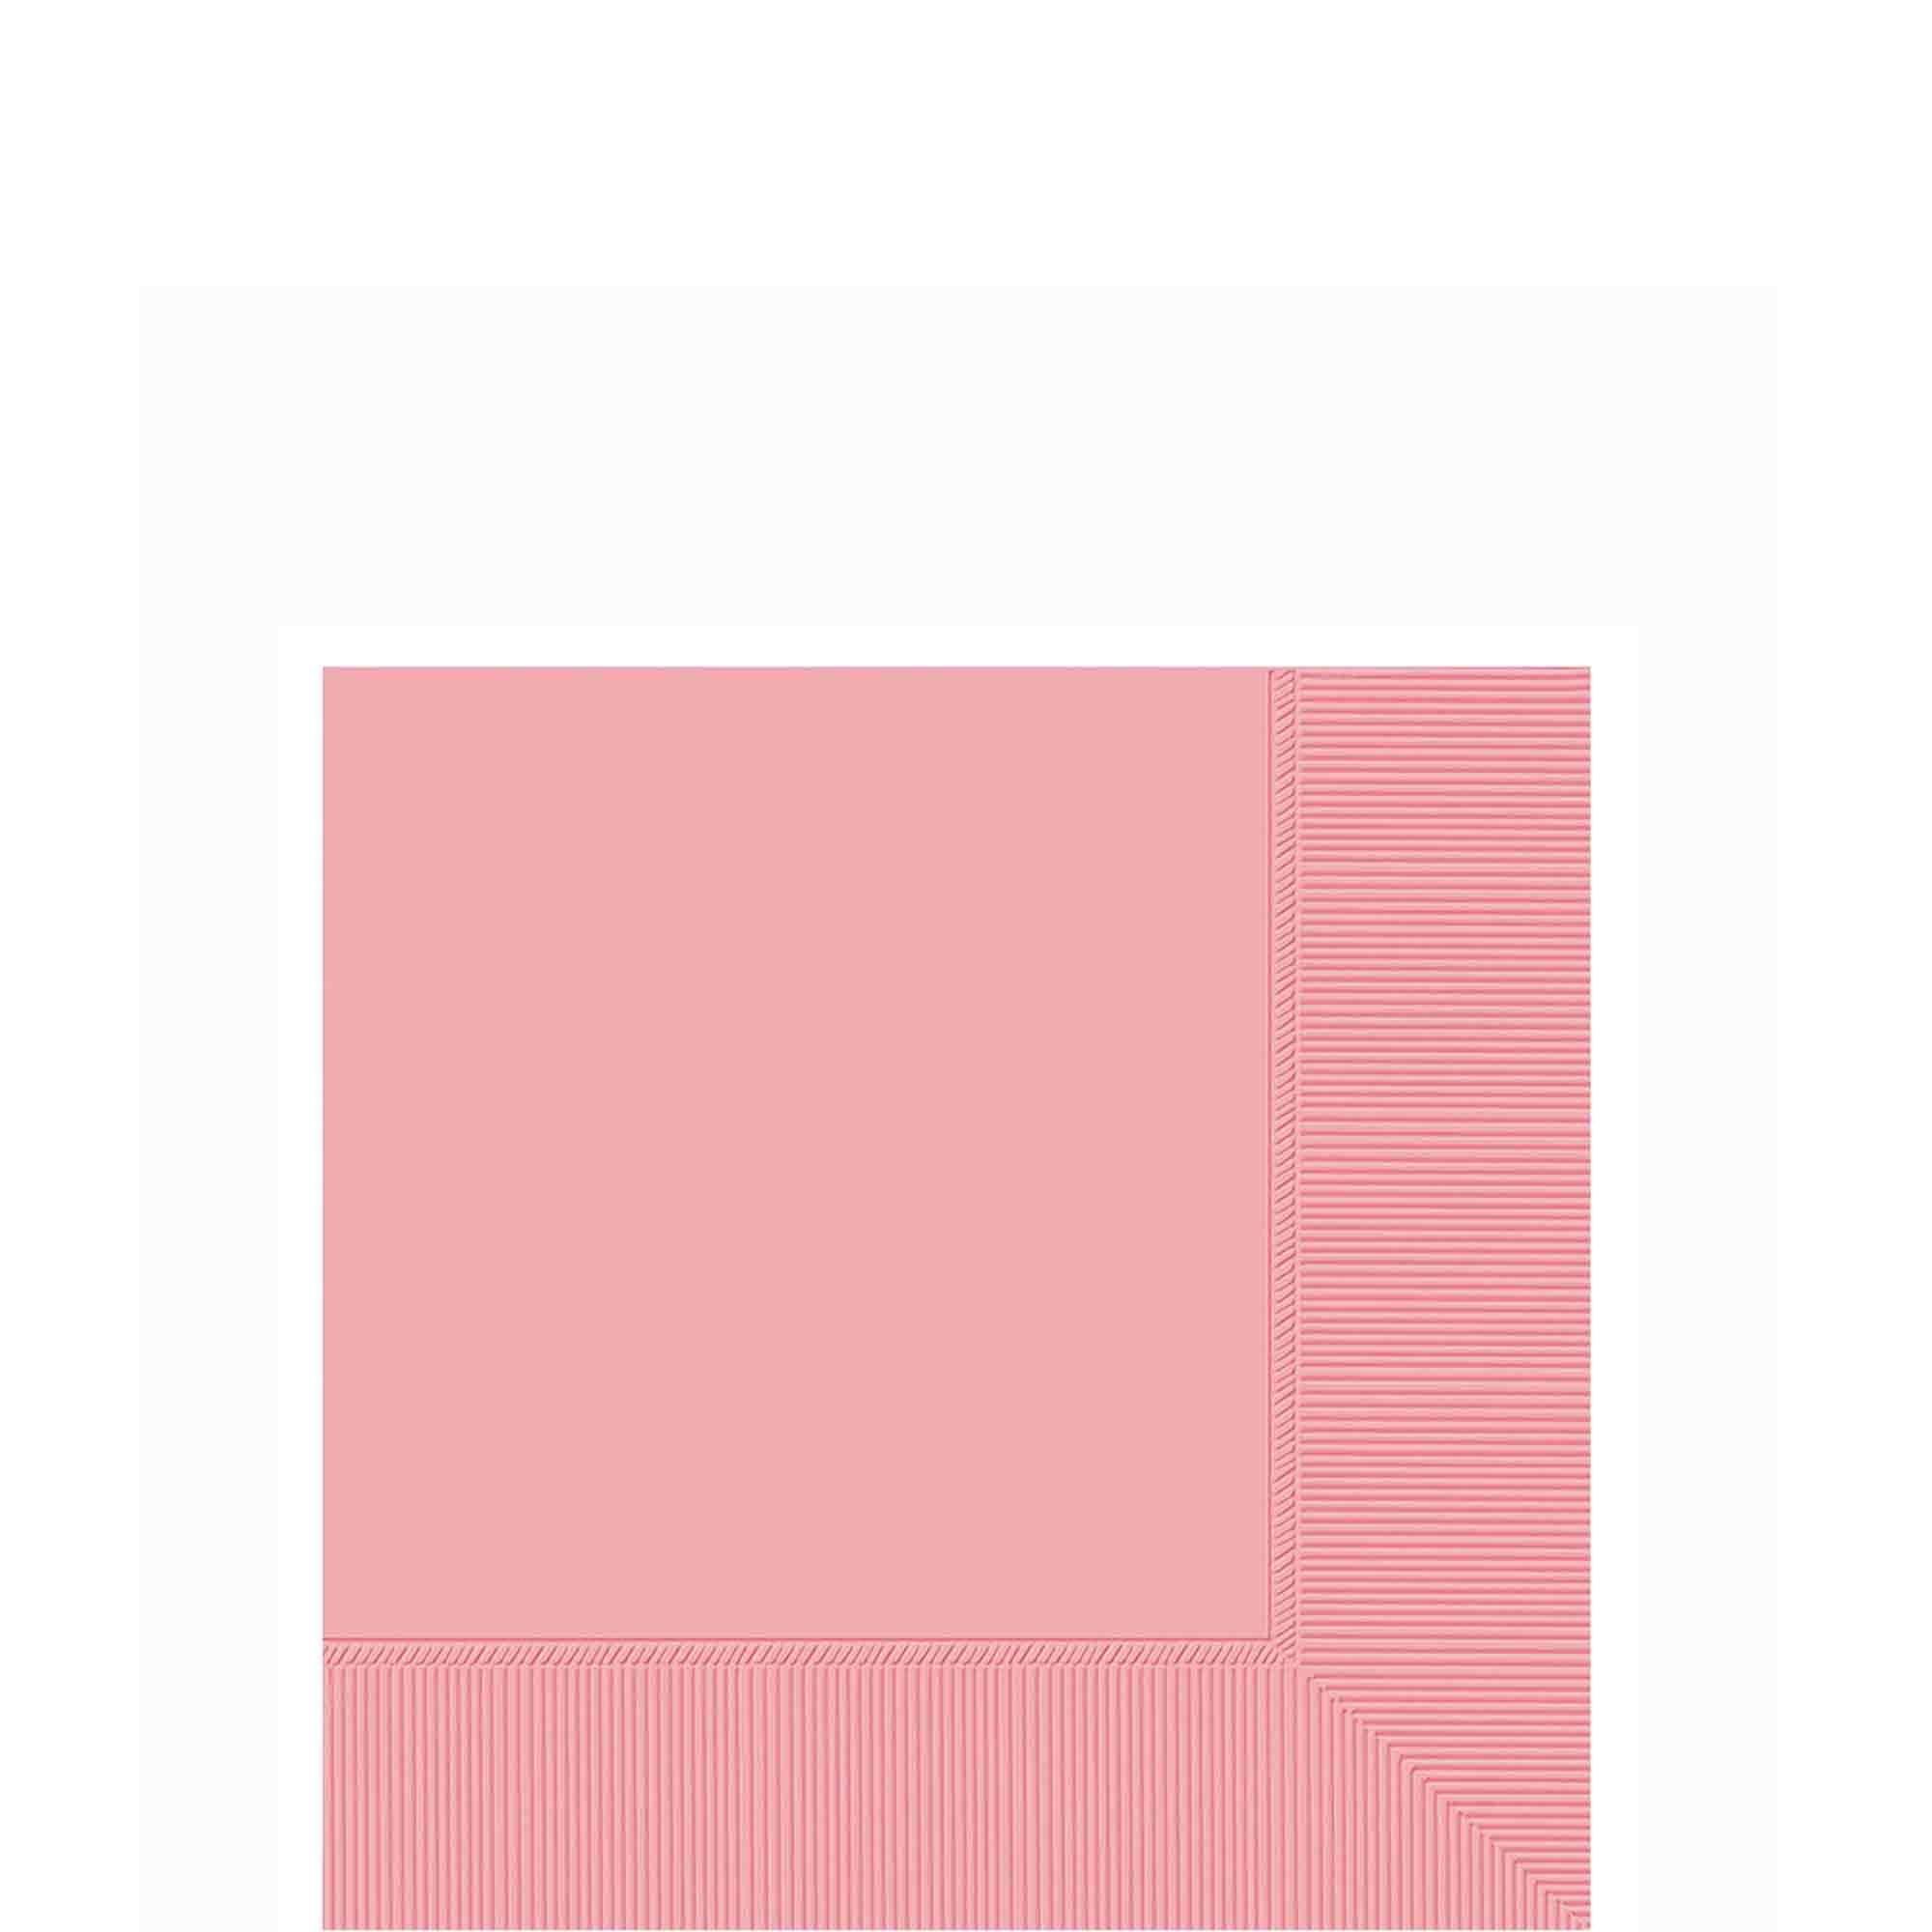 New Pink 2-Ply Beverage Napkins, 40cts